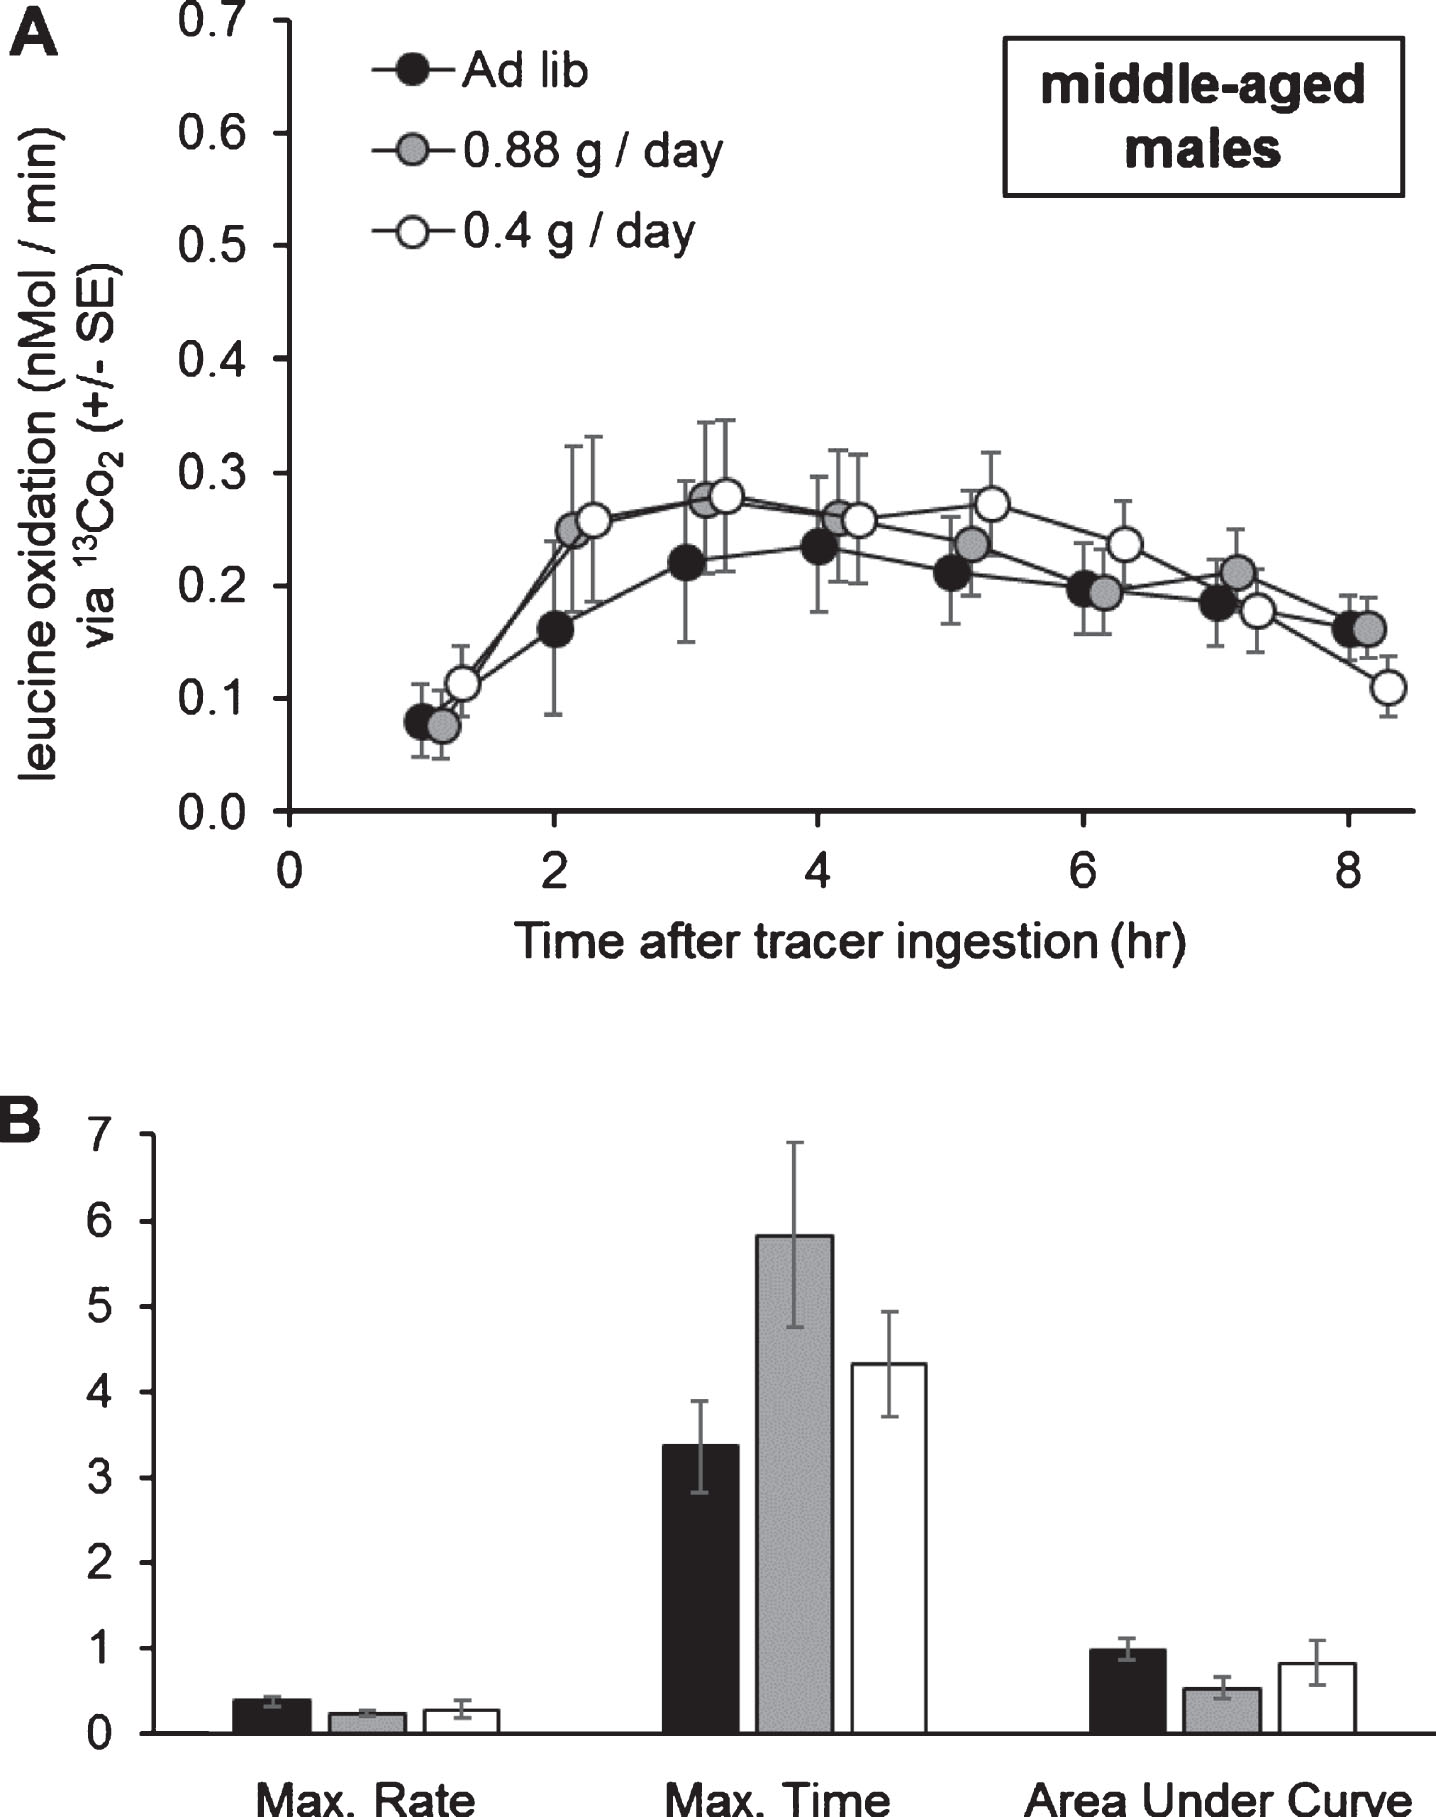 Organismal oxidation of leucine upon 0.4 g/day, 0.88 g/day, or ad libitum lettuce feeding, in middle-aged male grasshoppers. A) Diet level did not affect leucine oxidation at any point tested. B) Diet level did not affect the maximum rate of leucine oxidation (nMol / min), the time of occurrence of the maximum rate of leucine oxidation (hours after tracer ingestion), or the Area Under the Curve (nMol / min * 100). Oxidation curve data were tested with one-way MANOVA with time as a dependent variable, and oxidation parameters were tested with one-way MANOVA. Error bars show one Standard Error.